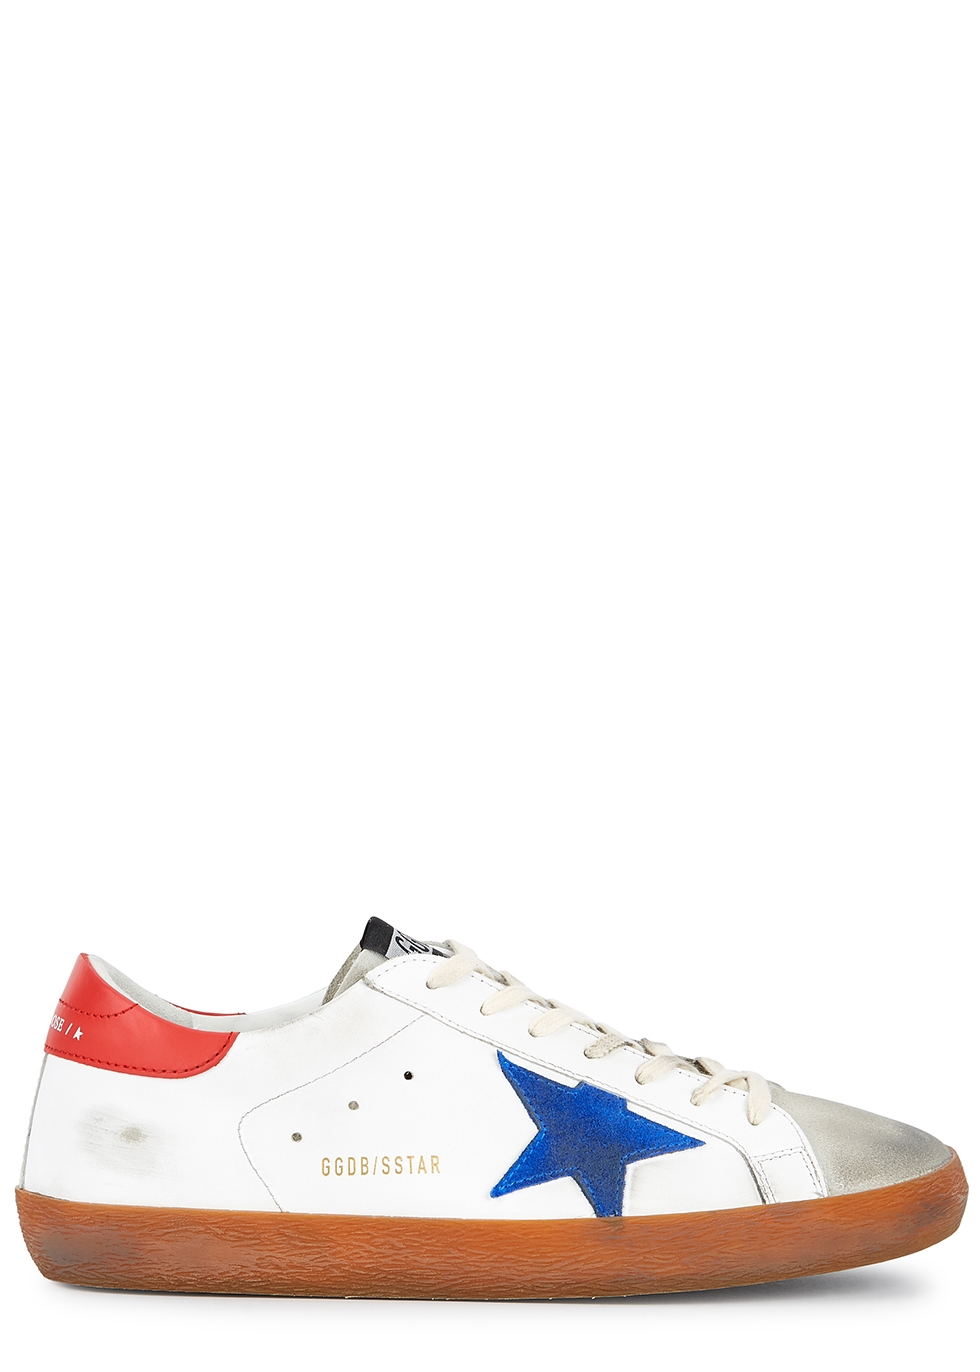 red white and blue golden goose